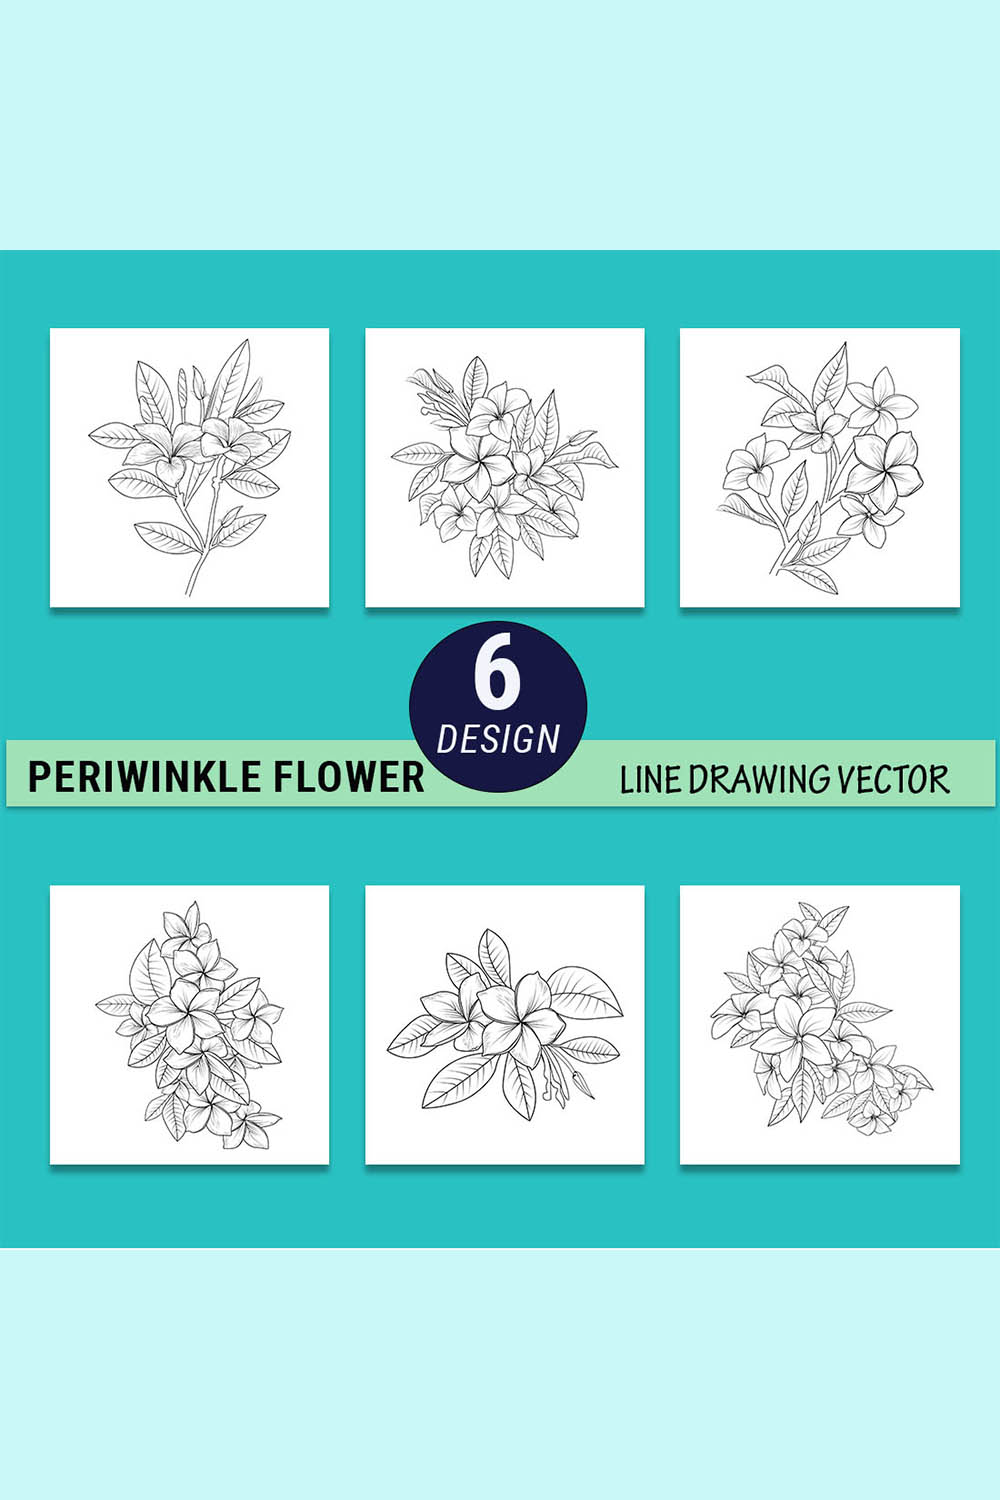 Frangipani flower drawing, vector sketch hand frangipani flower, sketch frangipani flower drawing, realistic frangipani flower drawing, realistic plumeria drawing pinterest preview image.